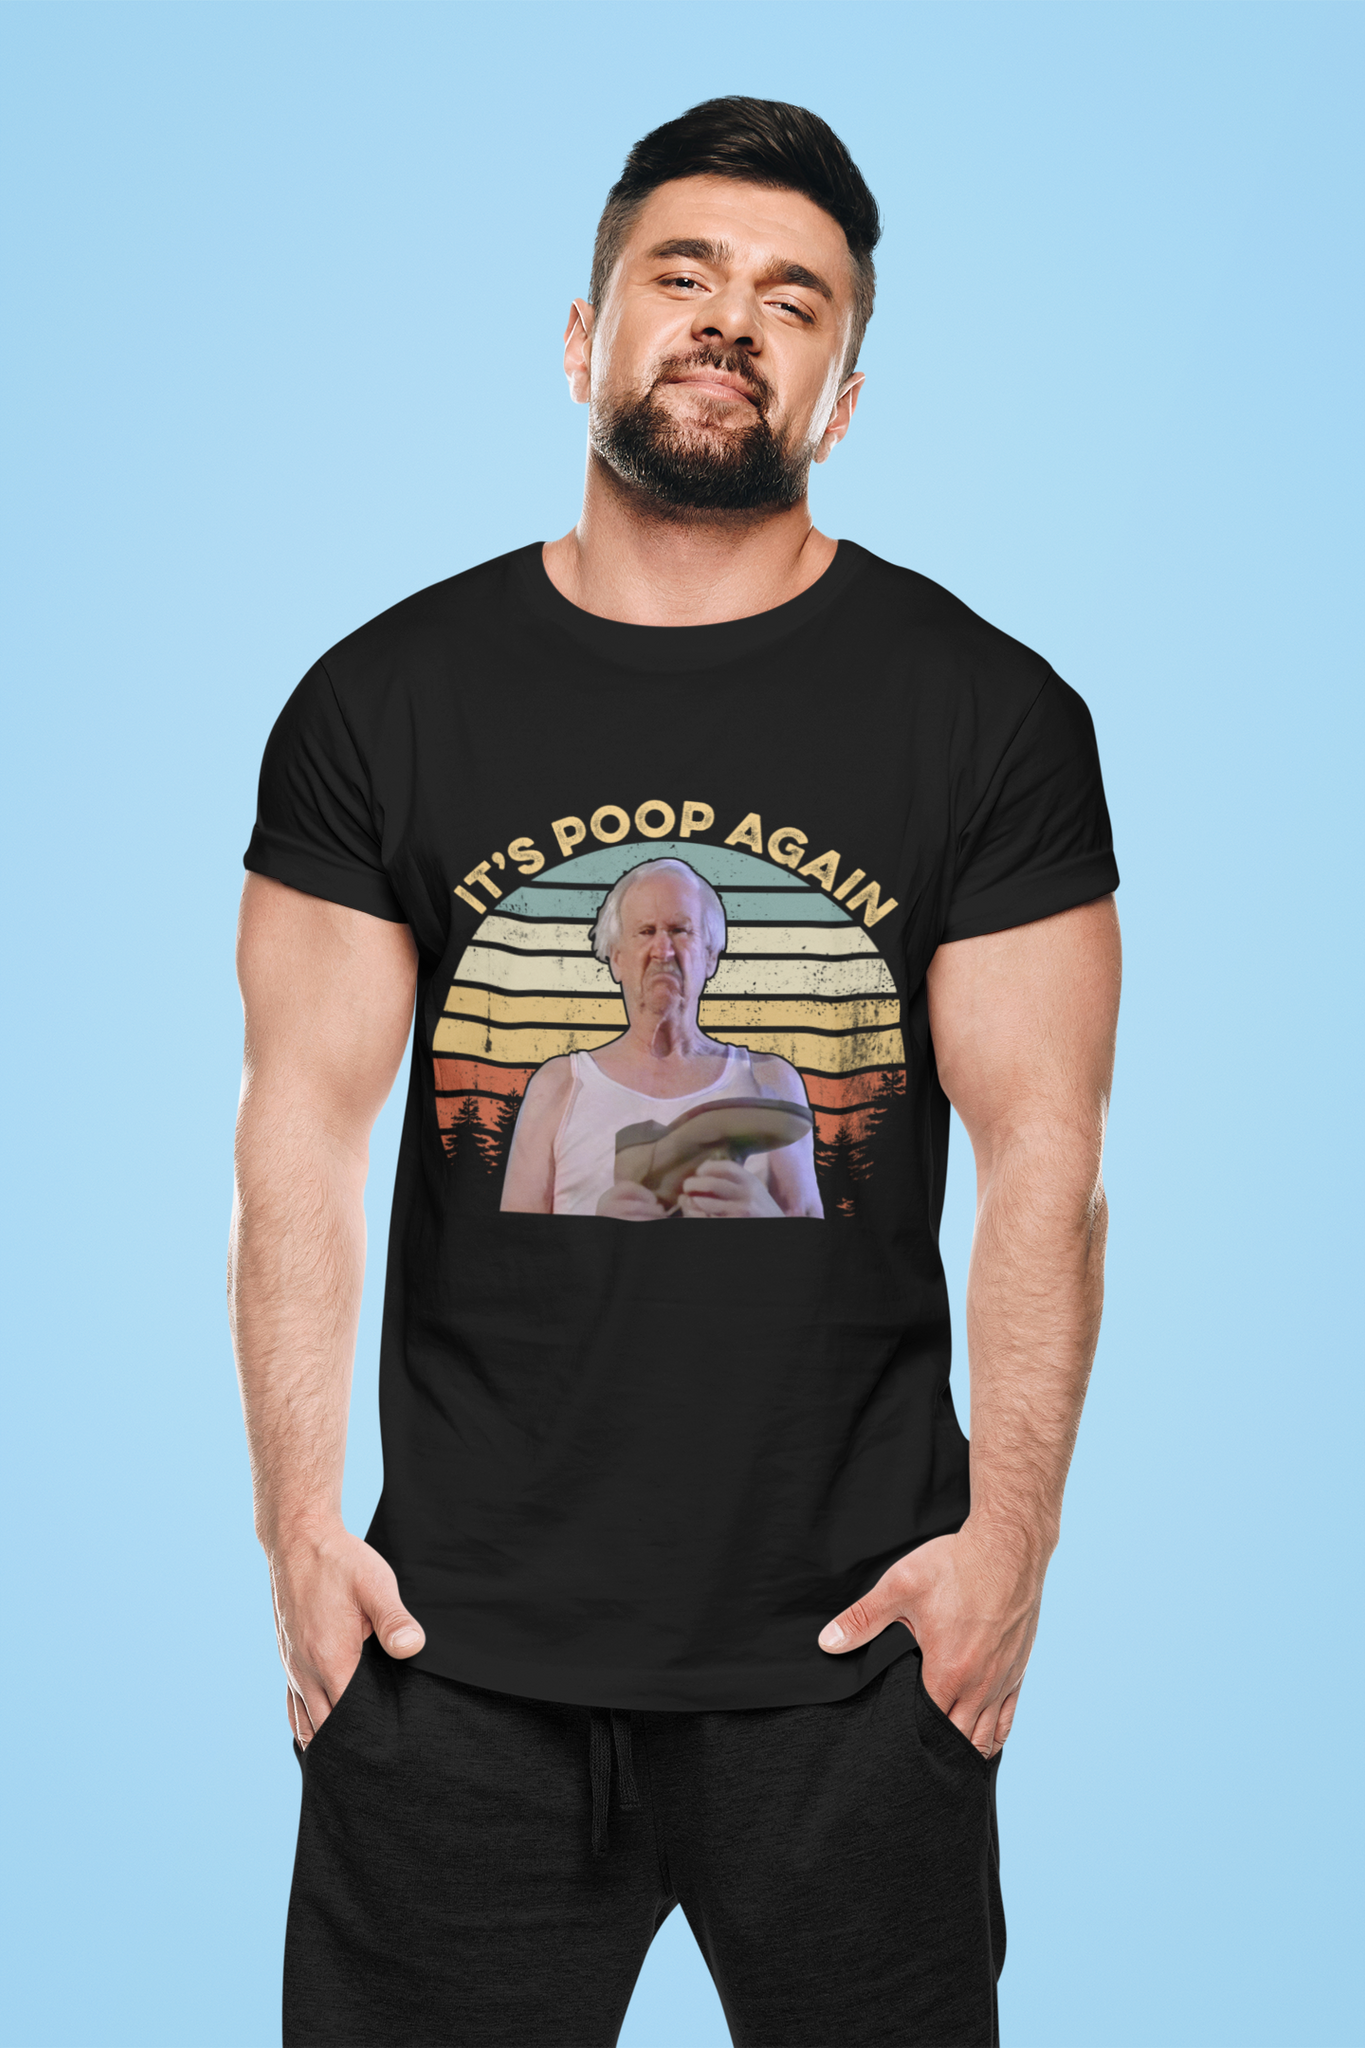 Billy Madison Vintage T Shirt, Its Poop Again Tshirt, Ted Old Man Clemens T Shirt